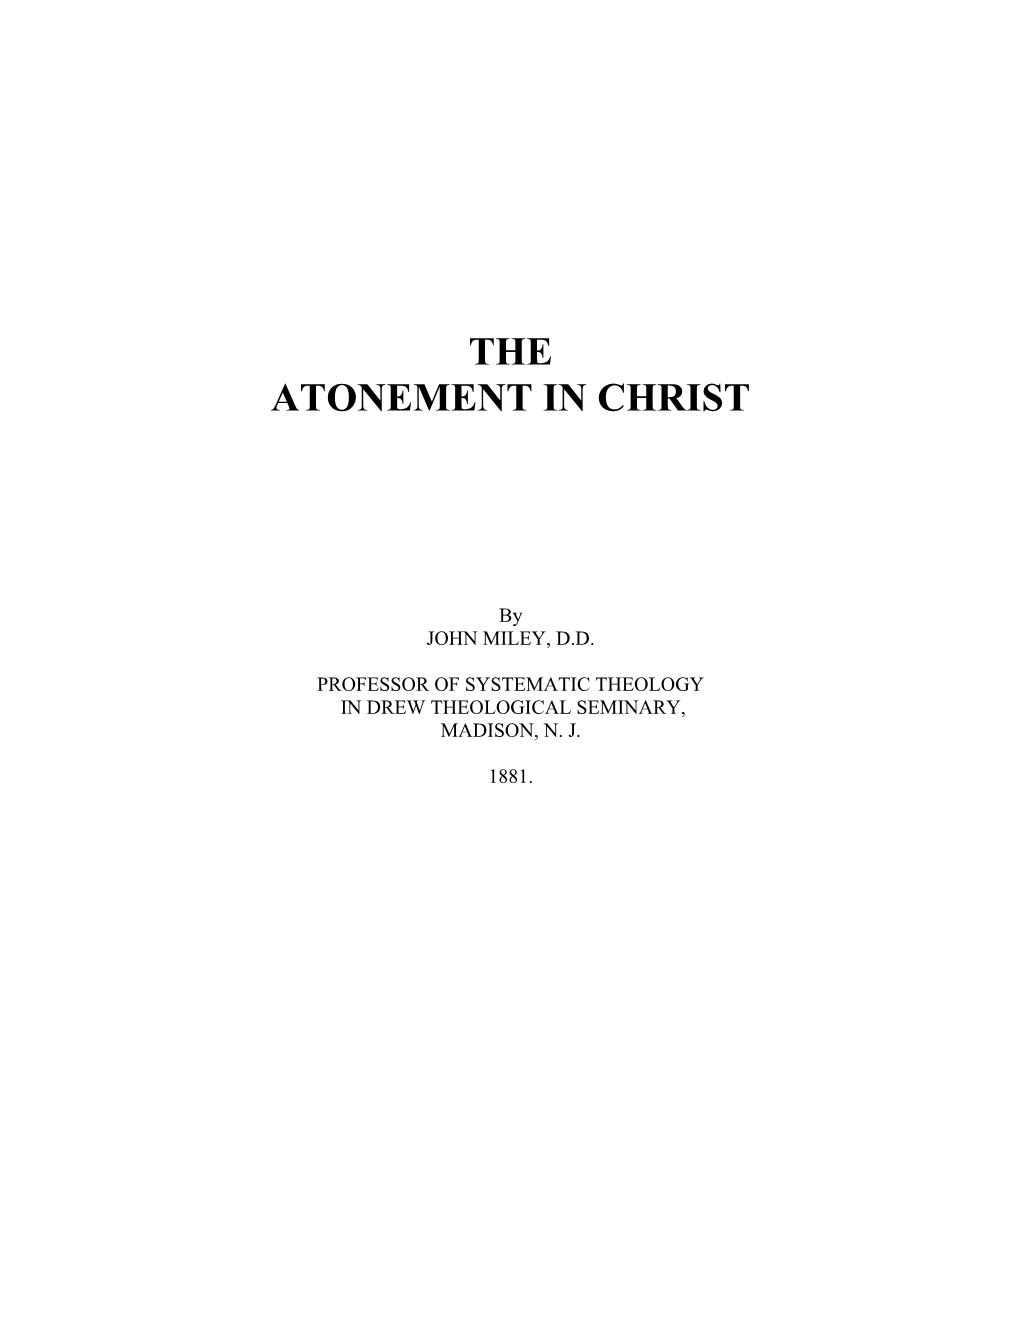 Atonement in Christ